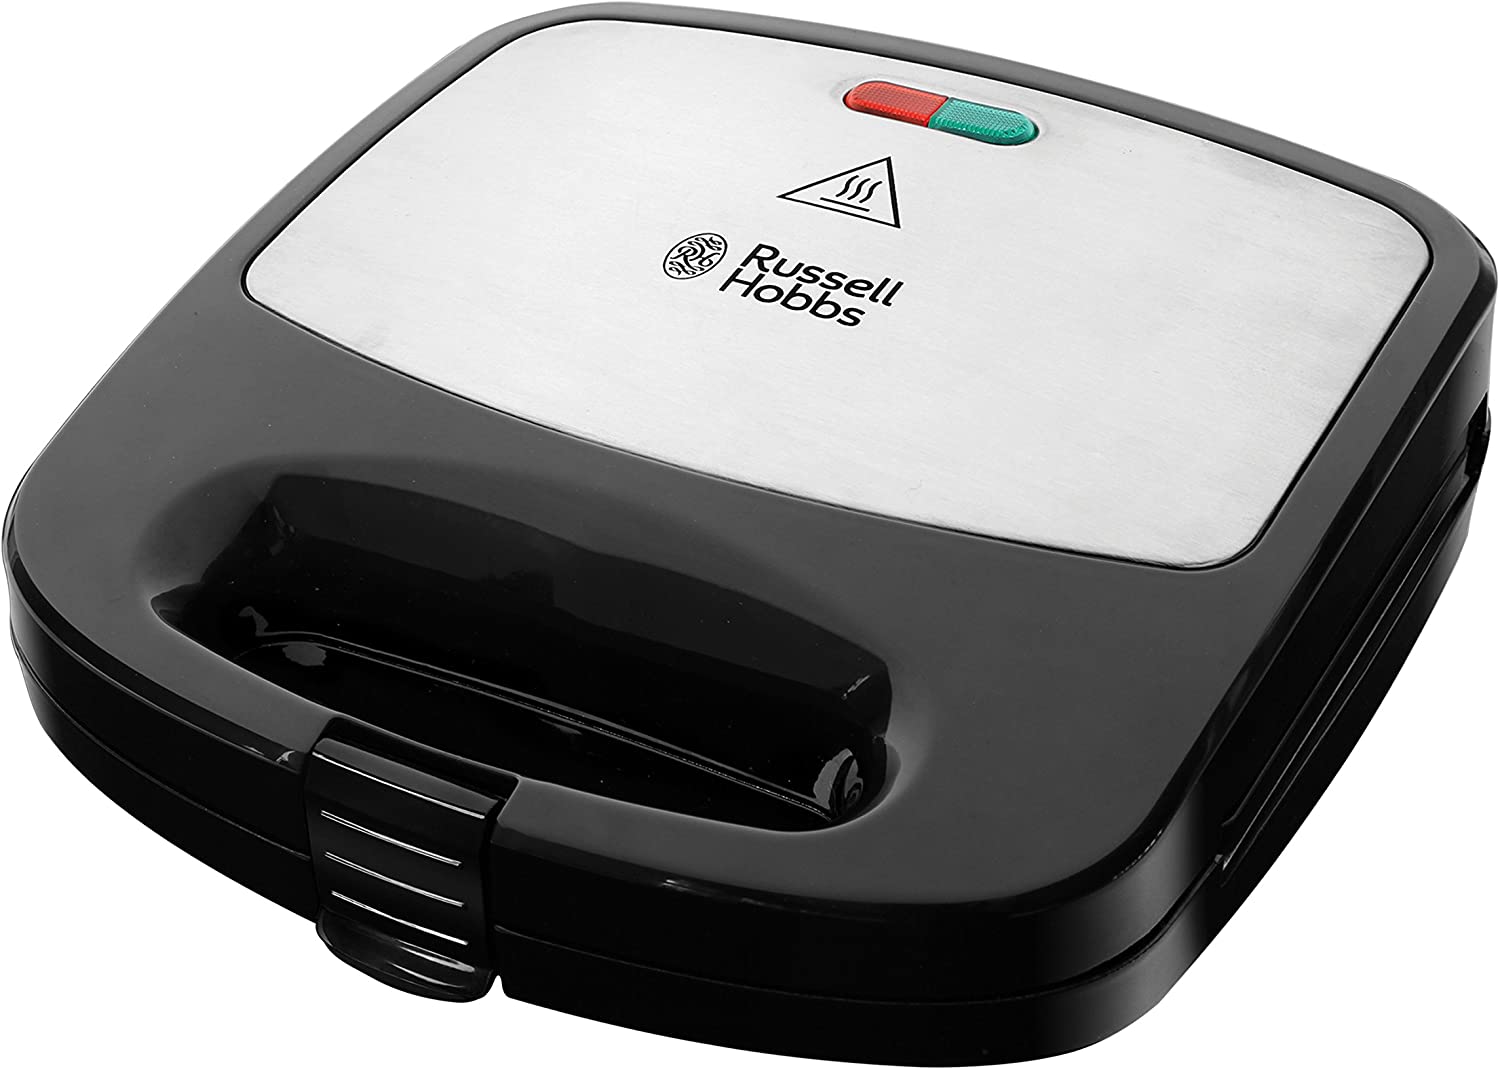 Russell Hobbs 24540 3-in-1 Combi Snack, Panini, Waffle and Sandwich Toaster Maker